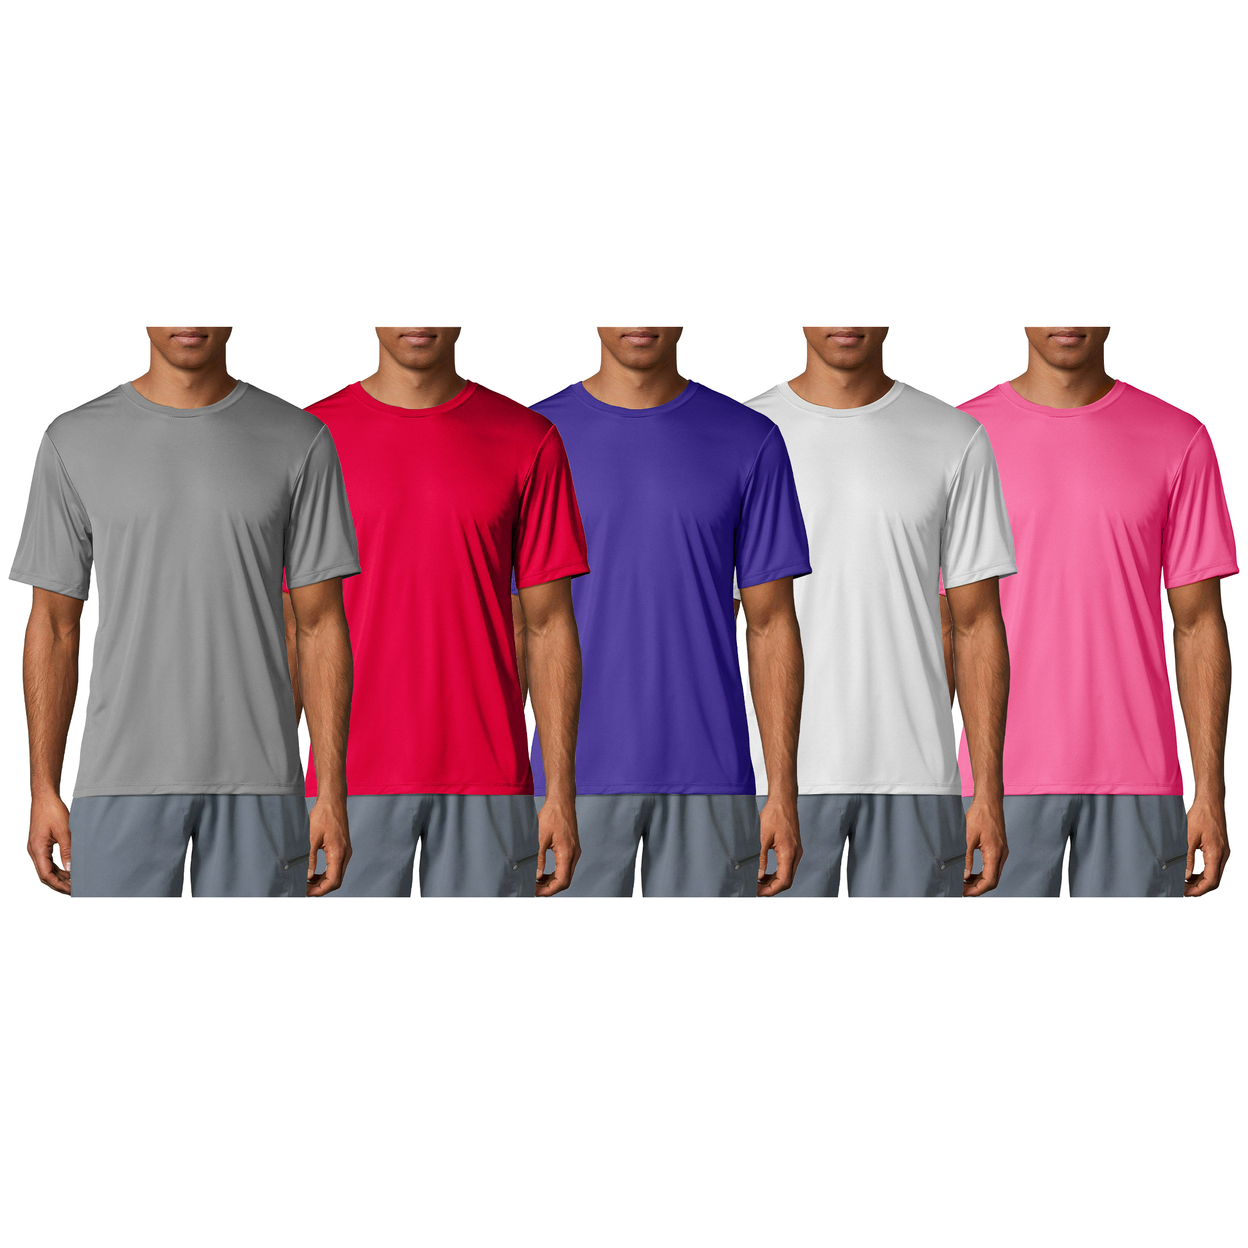 Multi-Pack: Men's Moisture Wicking Cool Dri-Fit Performance Short Sleeve Crew Neck T-Shirts - 1-pack, Small